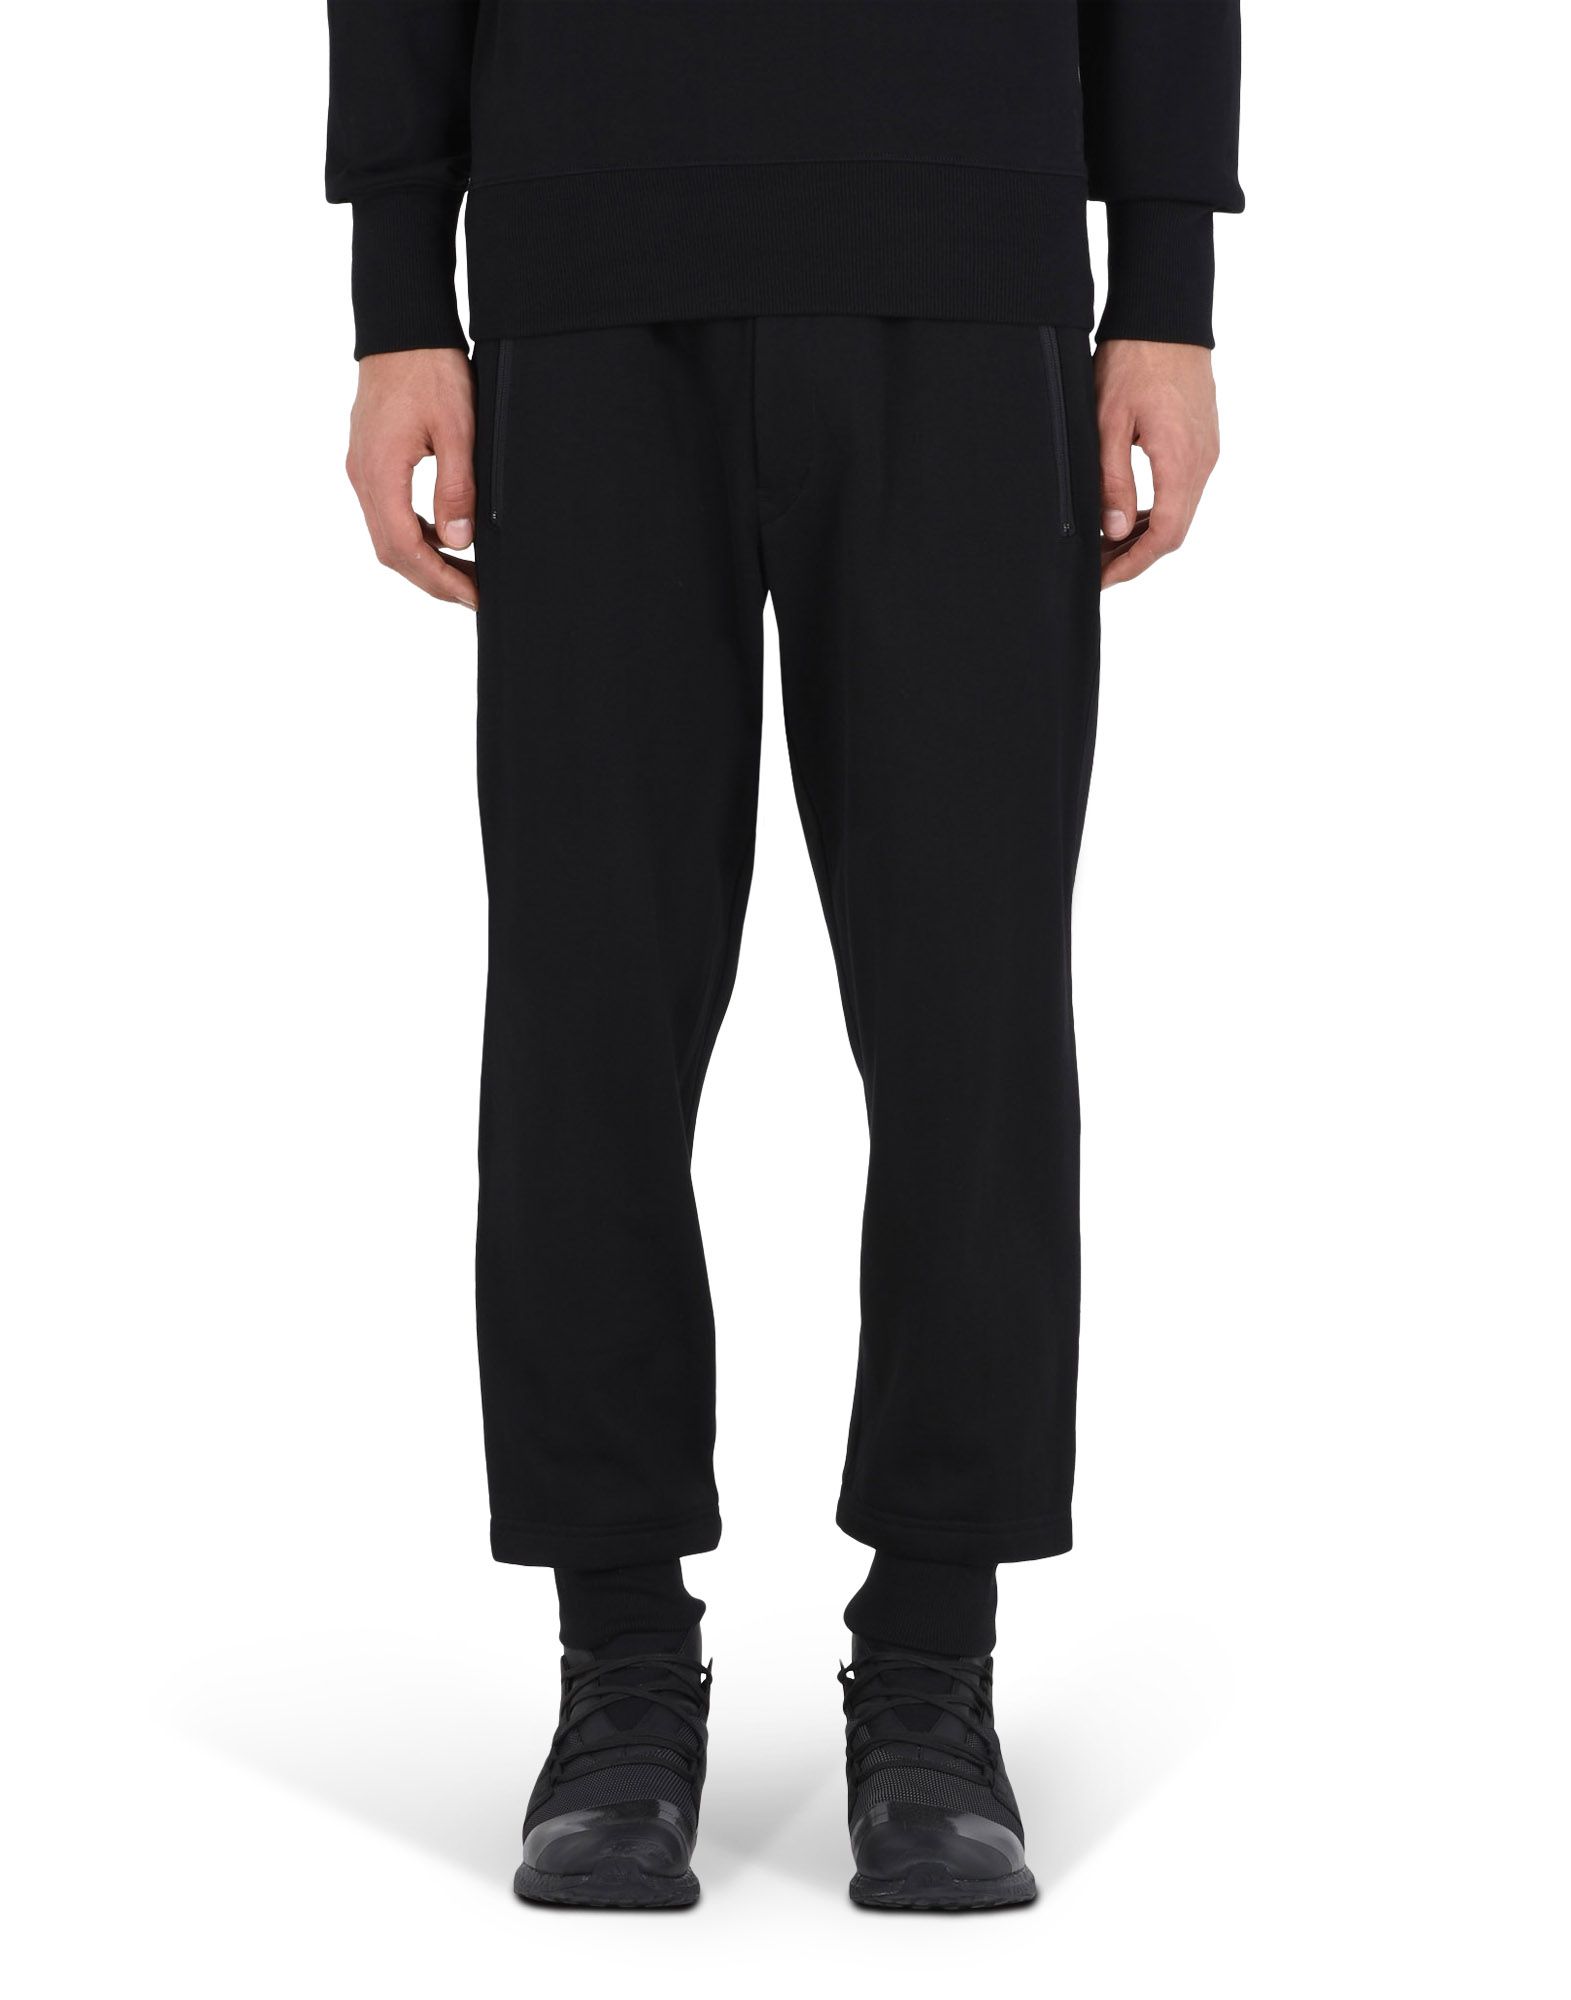 Y 3 BRANDED FT PANT ‎ ‎Sweatpants‎ ‎ ‎ | Adidas Y-3 Official Site